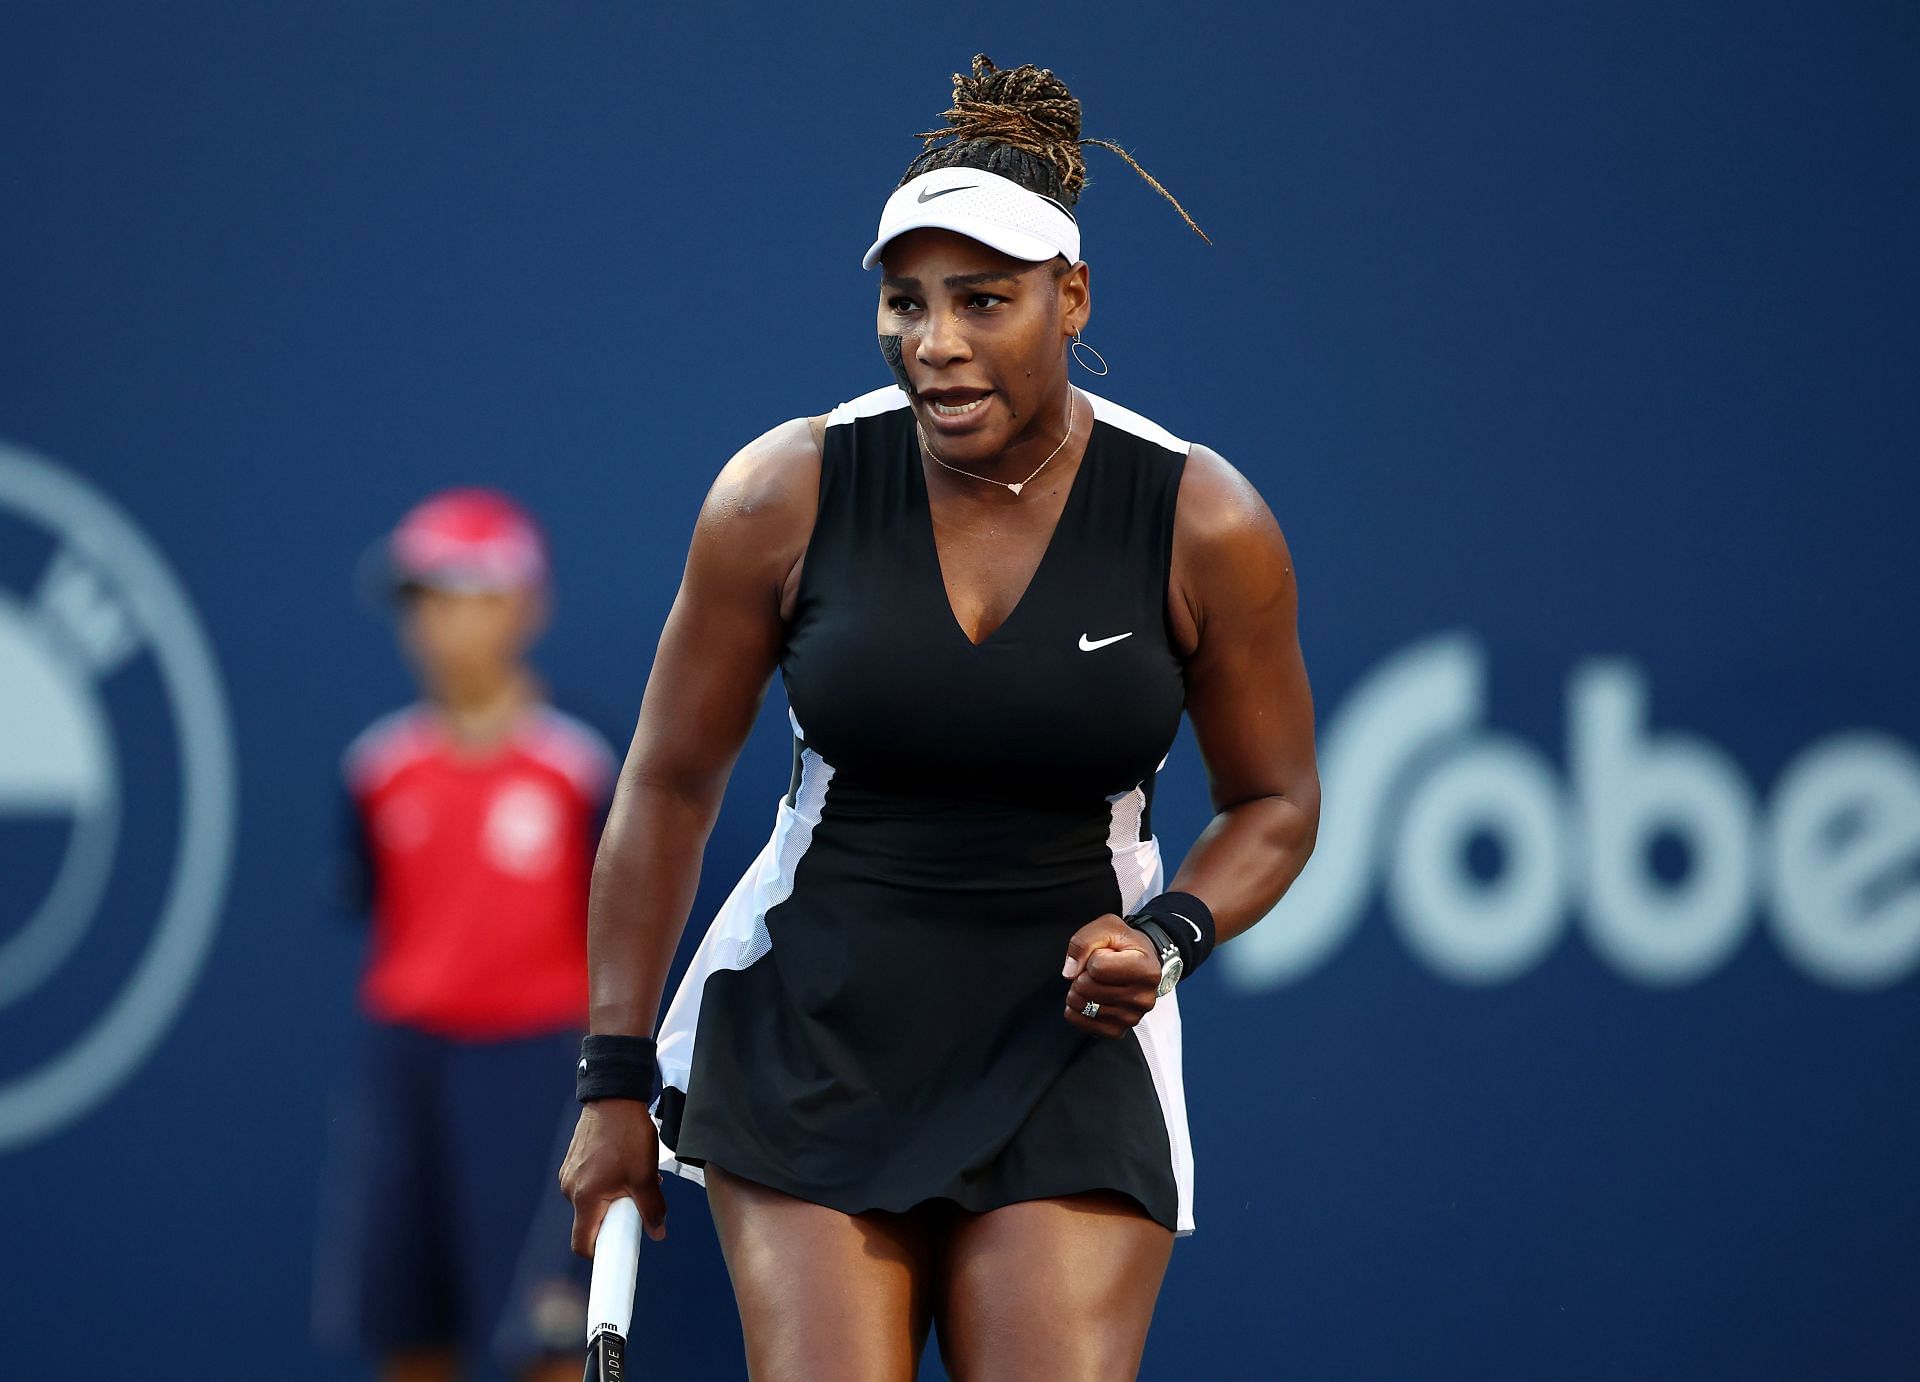 Serena Williams in action at the National Bank Open Toronto